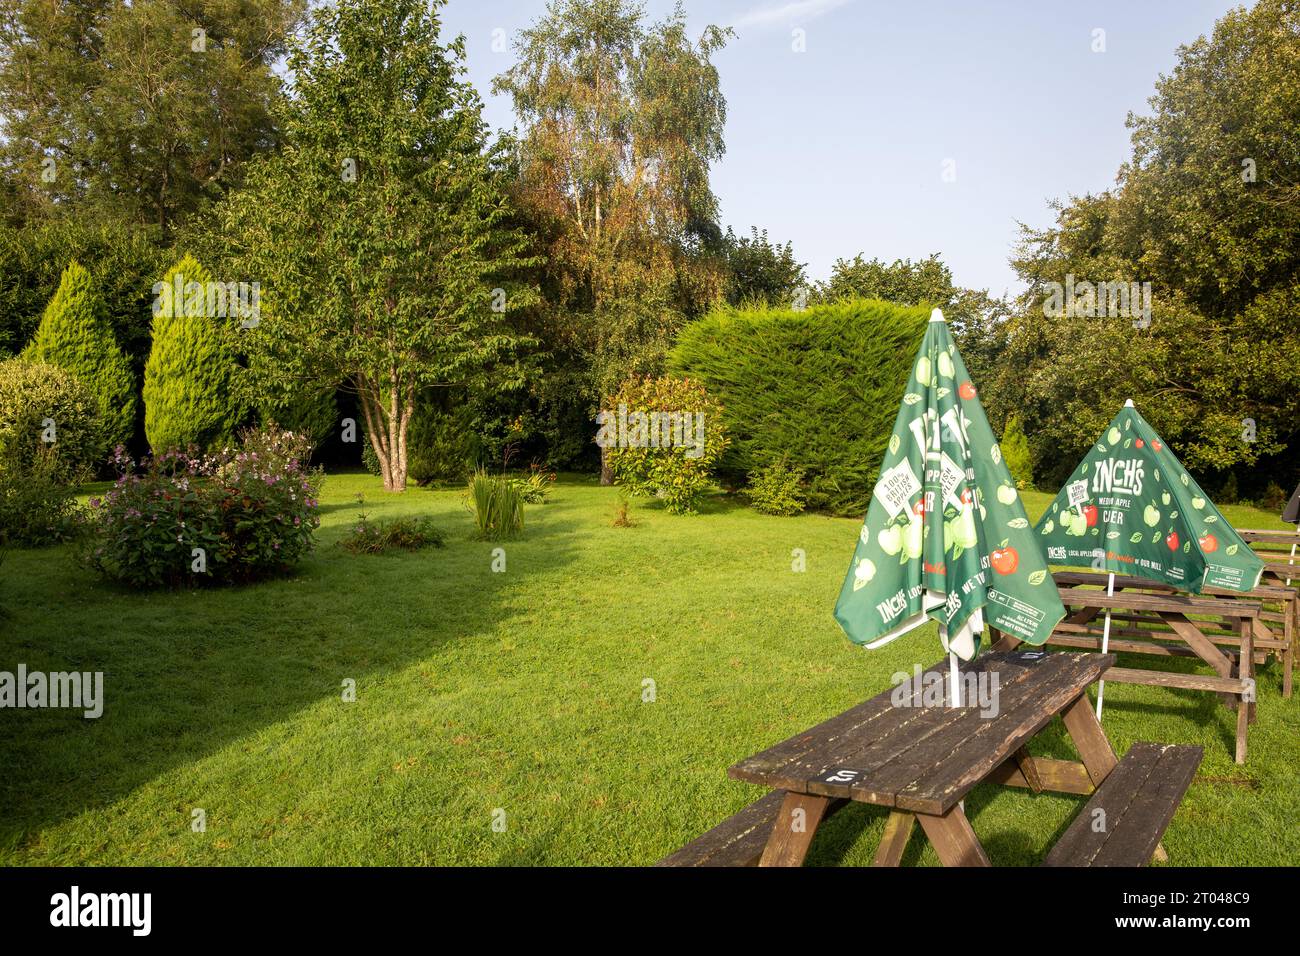 The Trusty Servant Inn in Minstead Lyndhurst is a public house serving food and providing accommodation, the beer and food garden shown,England,UK Stock Photo